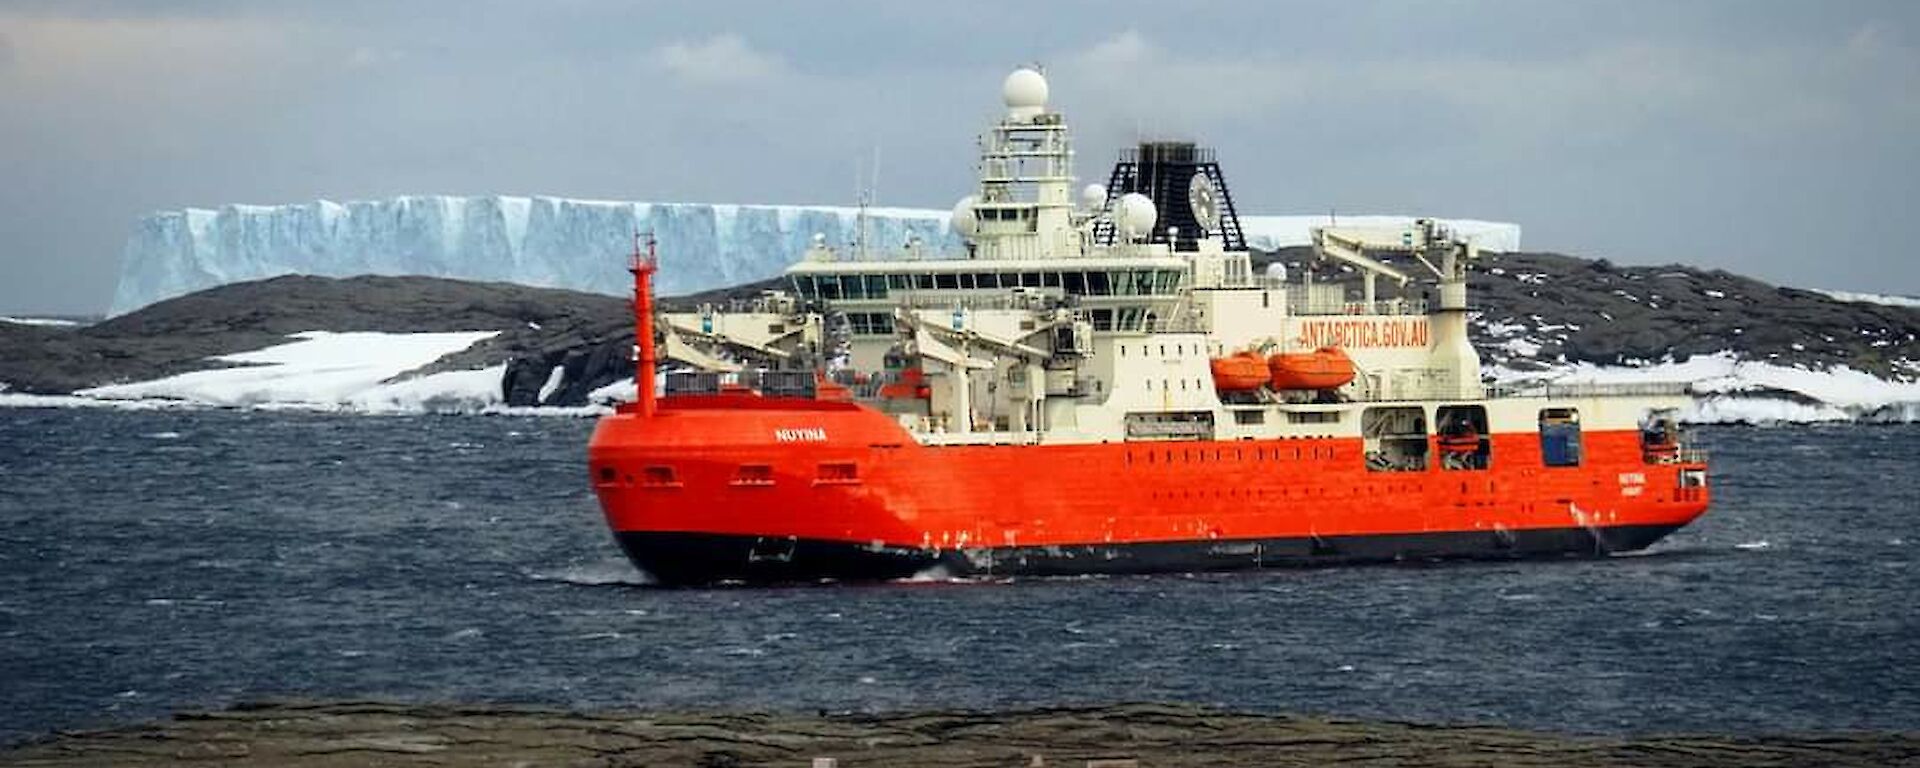 A red icebreaker ship sits in a choppy bay with a white iceberg in the background.